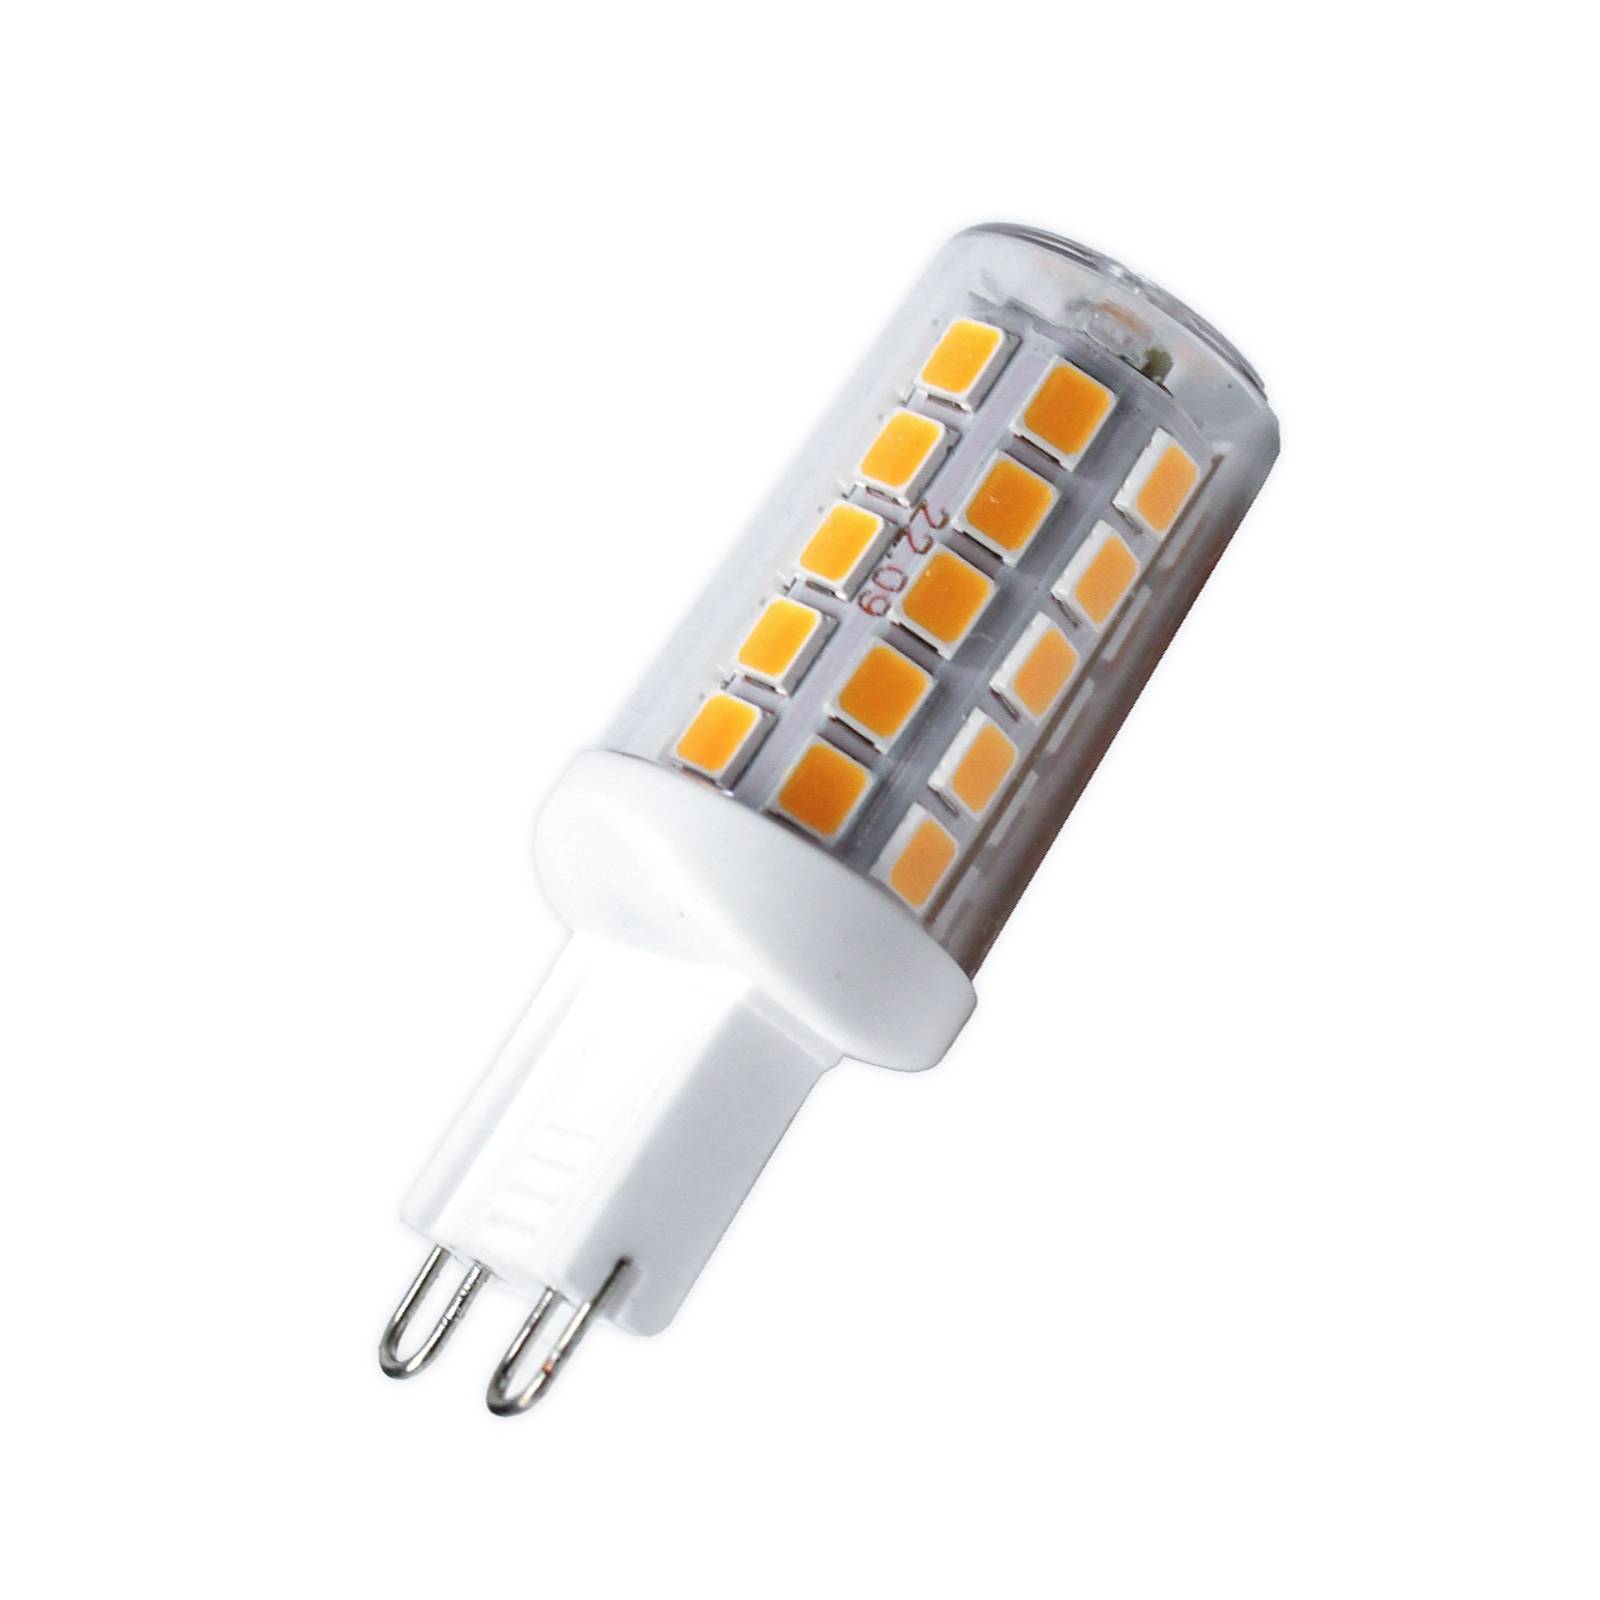 Top Light G9 3 W ampoule LED dimmable 2 700 K 330 lm